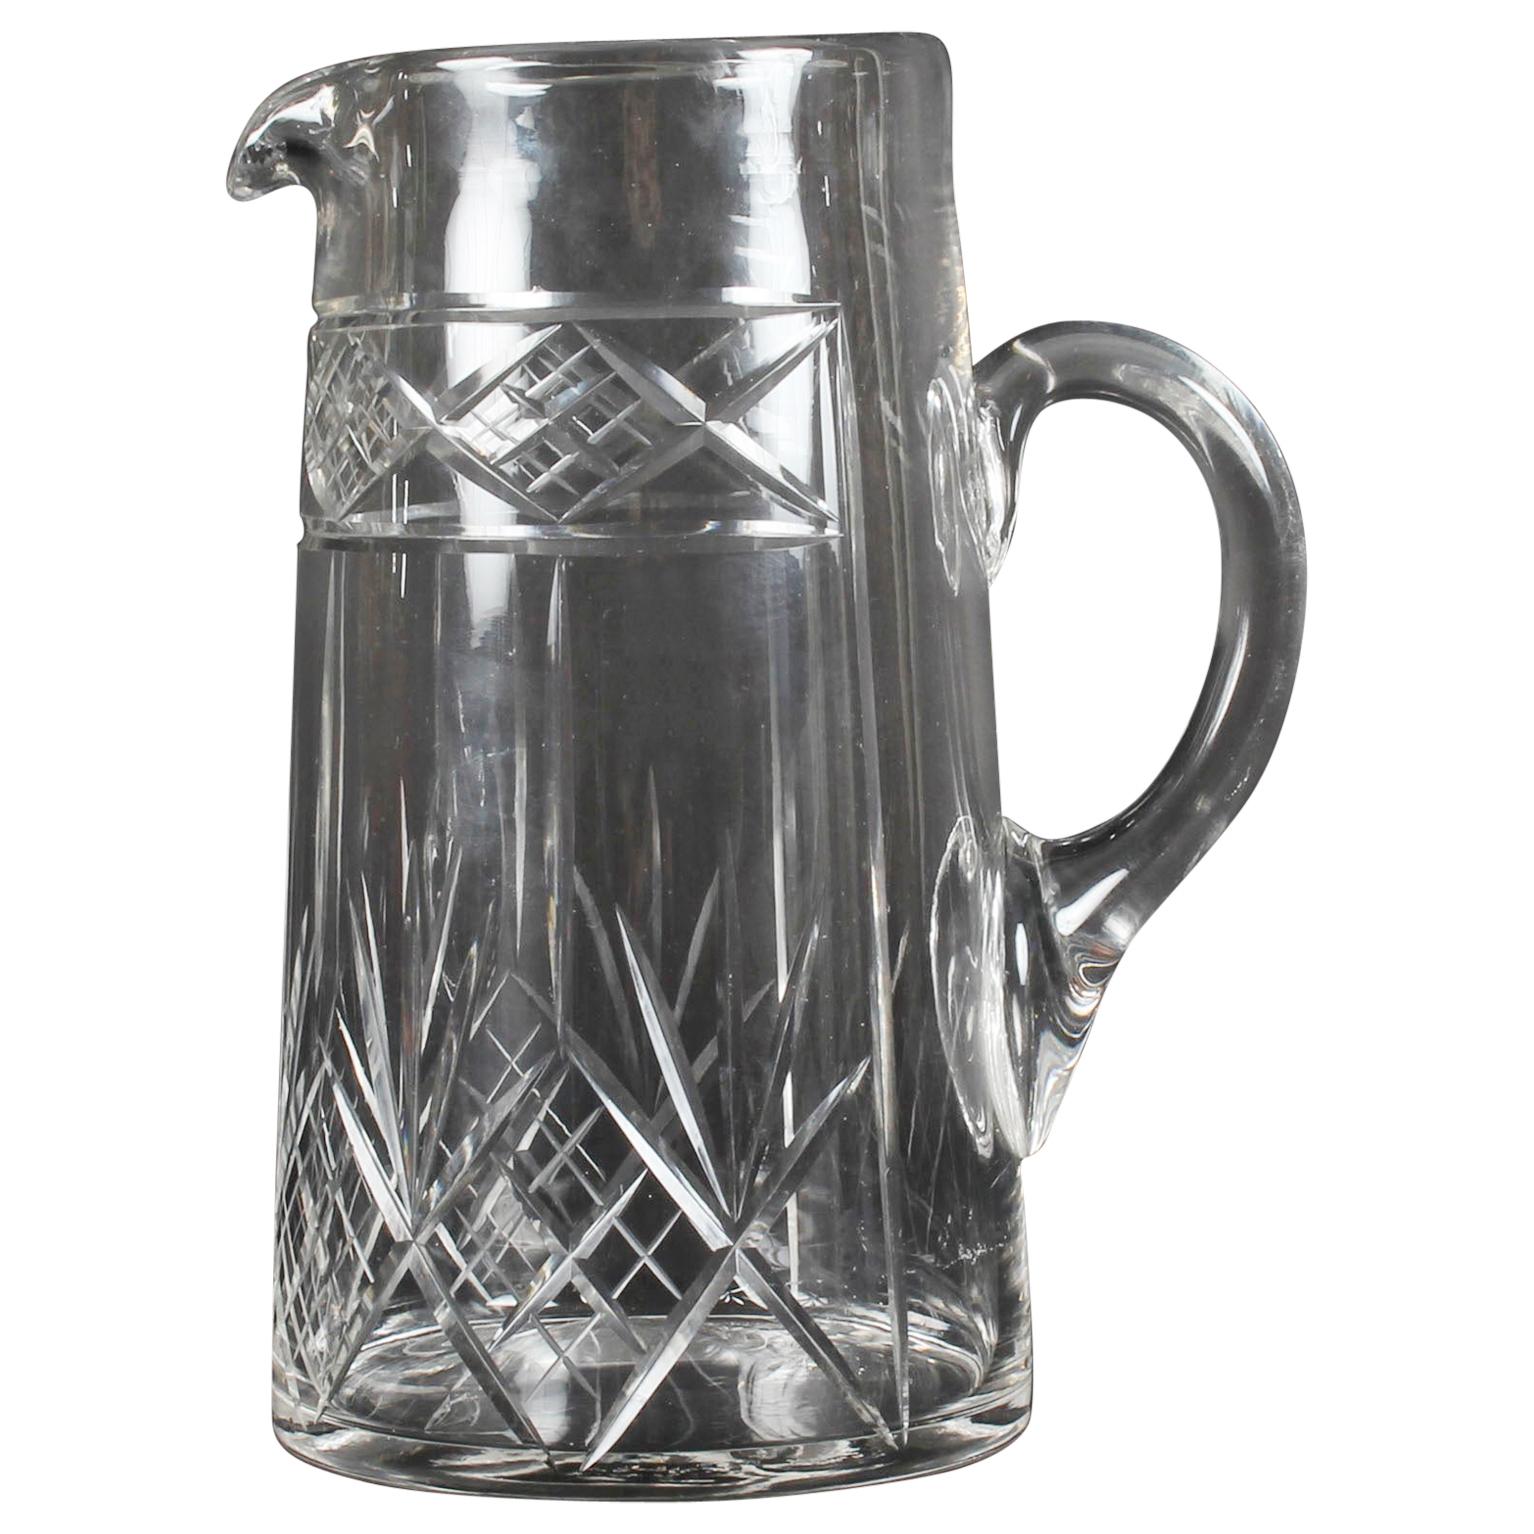 Antique Edwardian Cut Crystal Cocktail Jug Pitcher, Early 20th Century